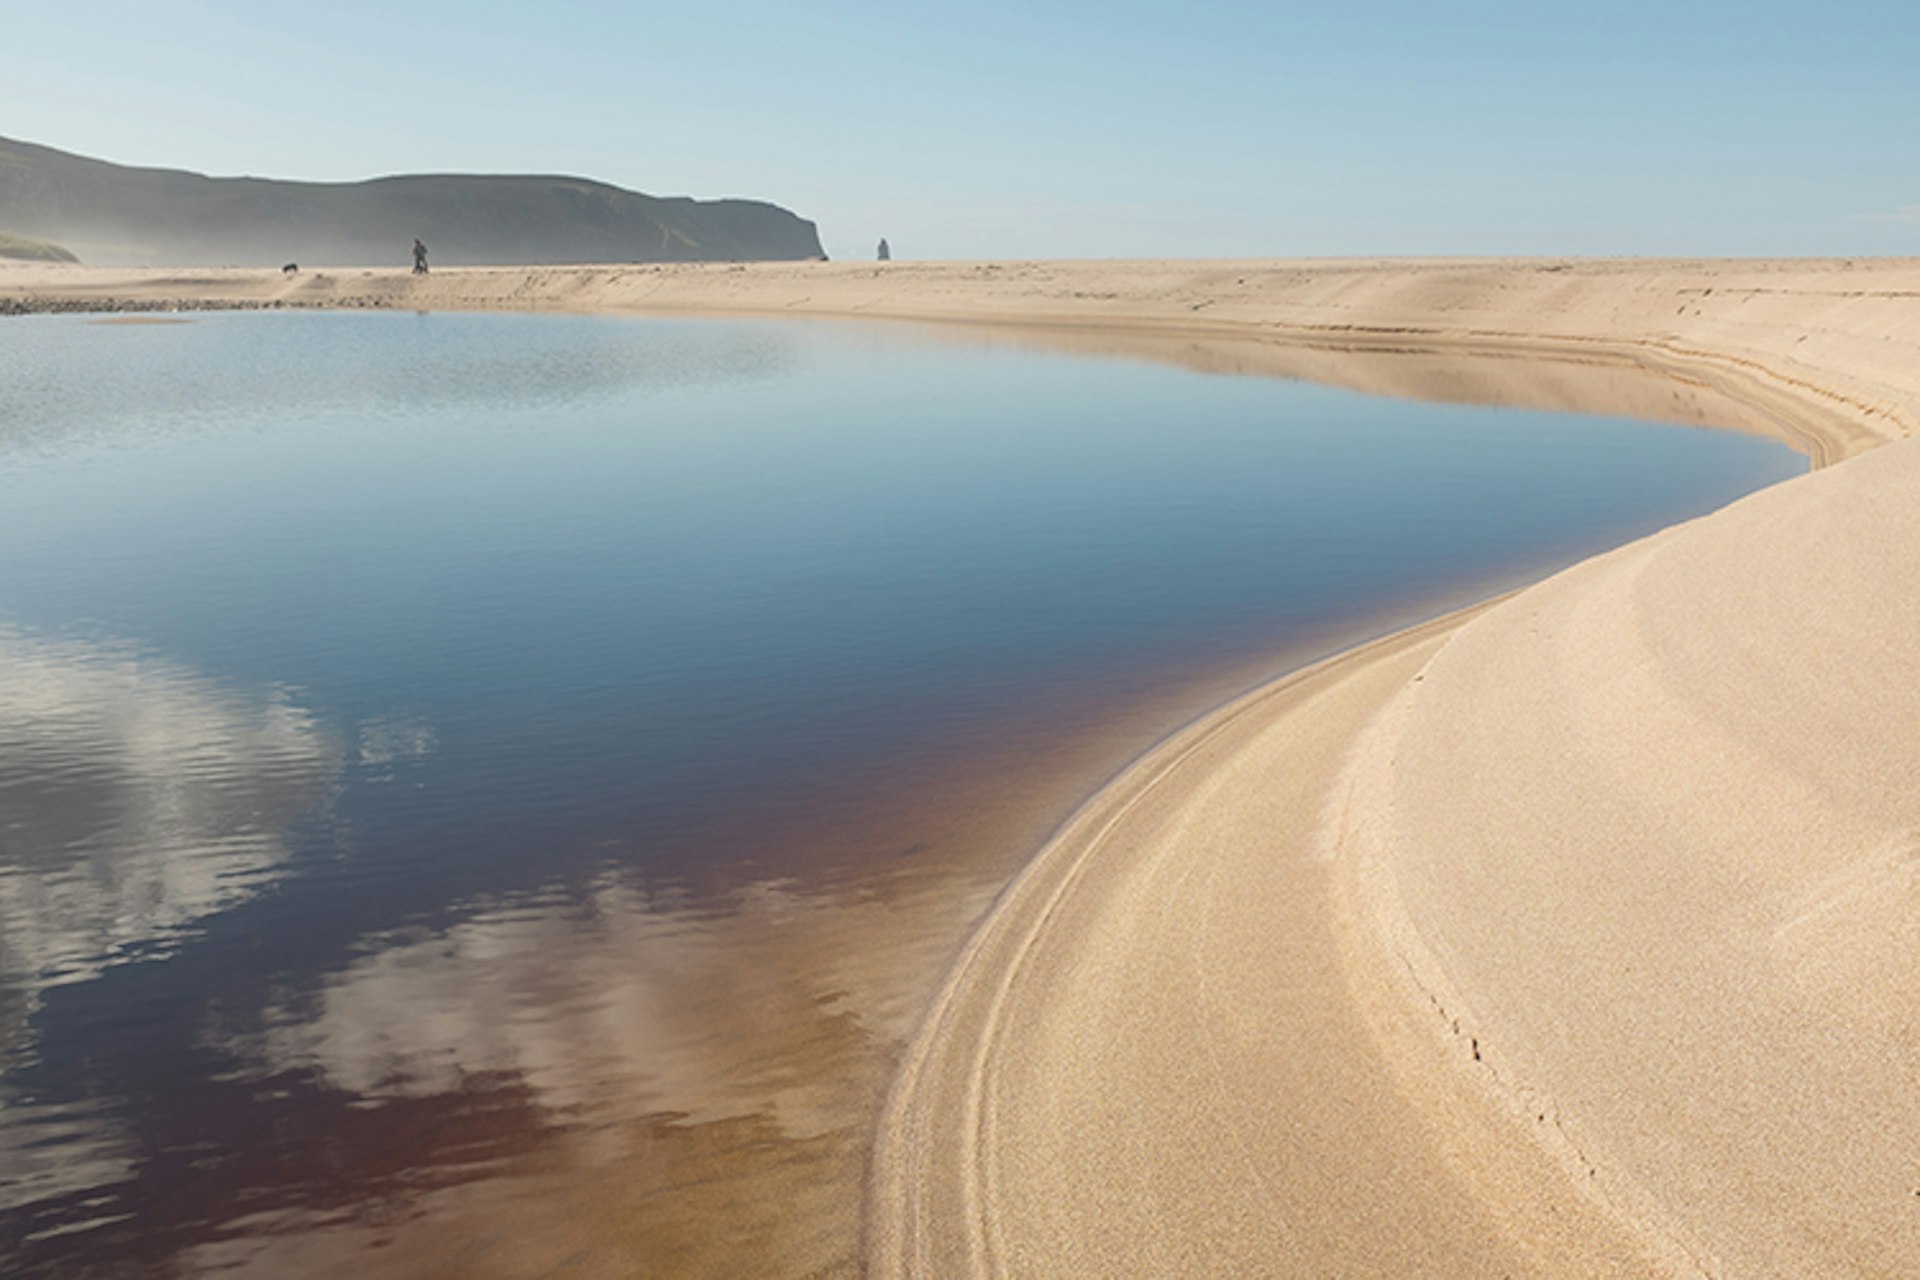 Beaches don't come much more dramatic than Scotland's remote Sandwood Bay. Image by richsouthwales / Shutterstock